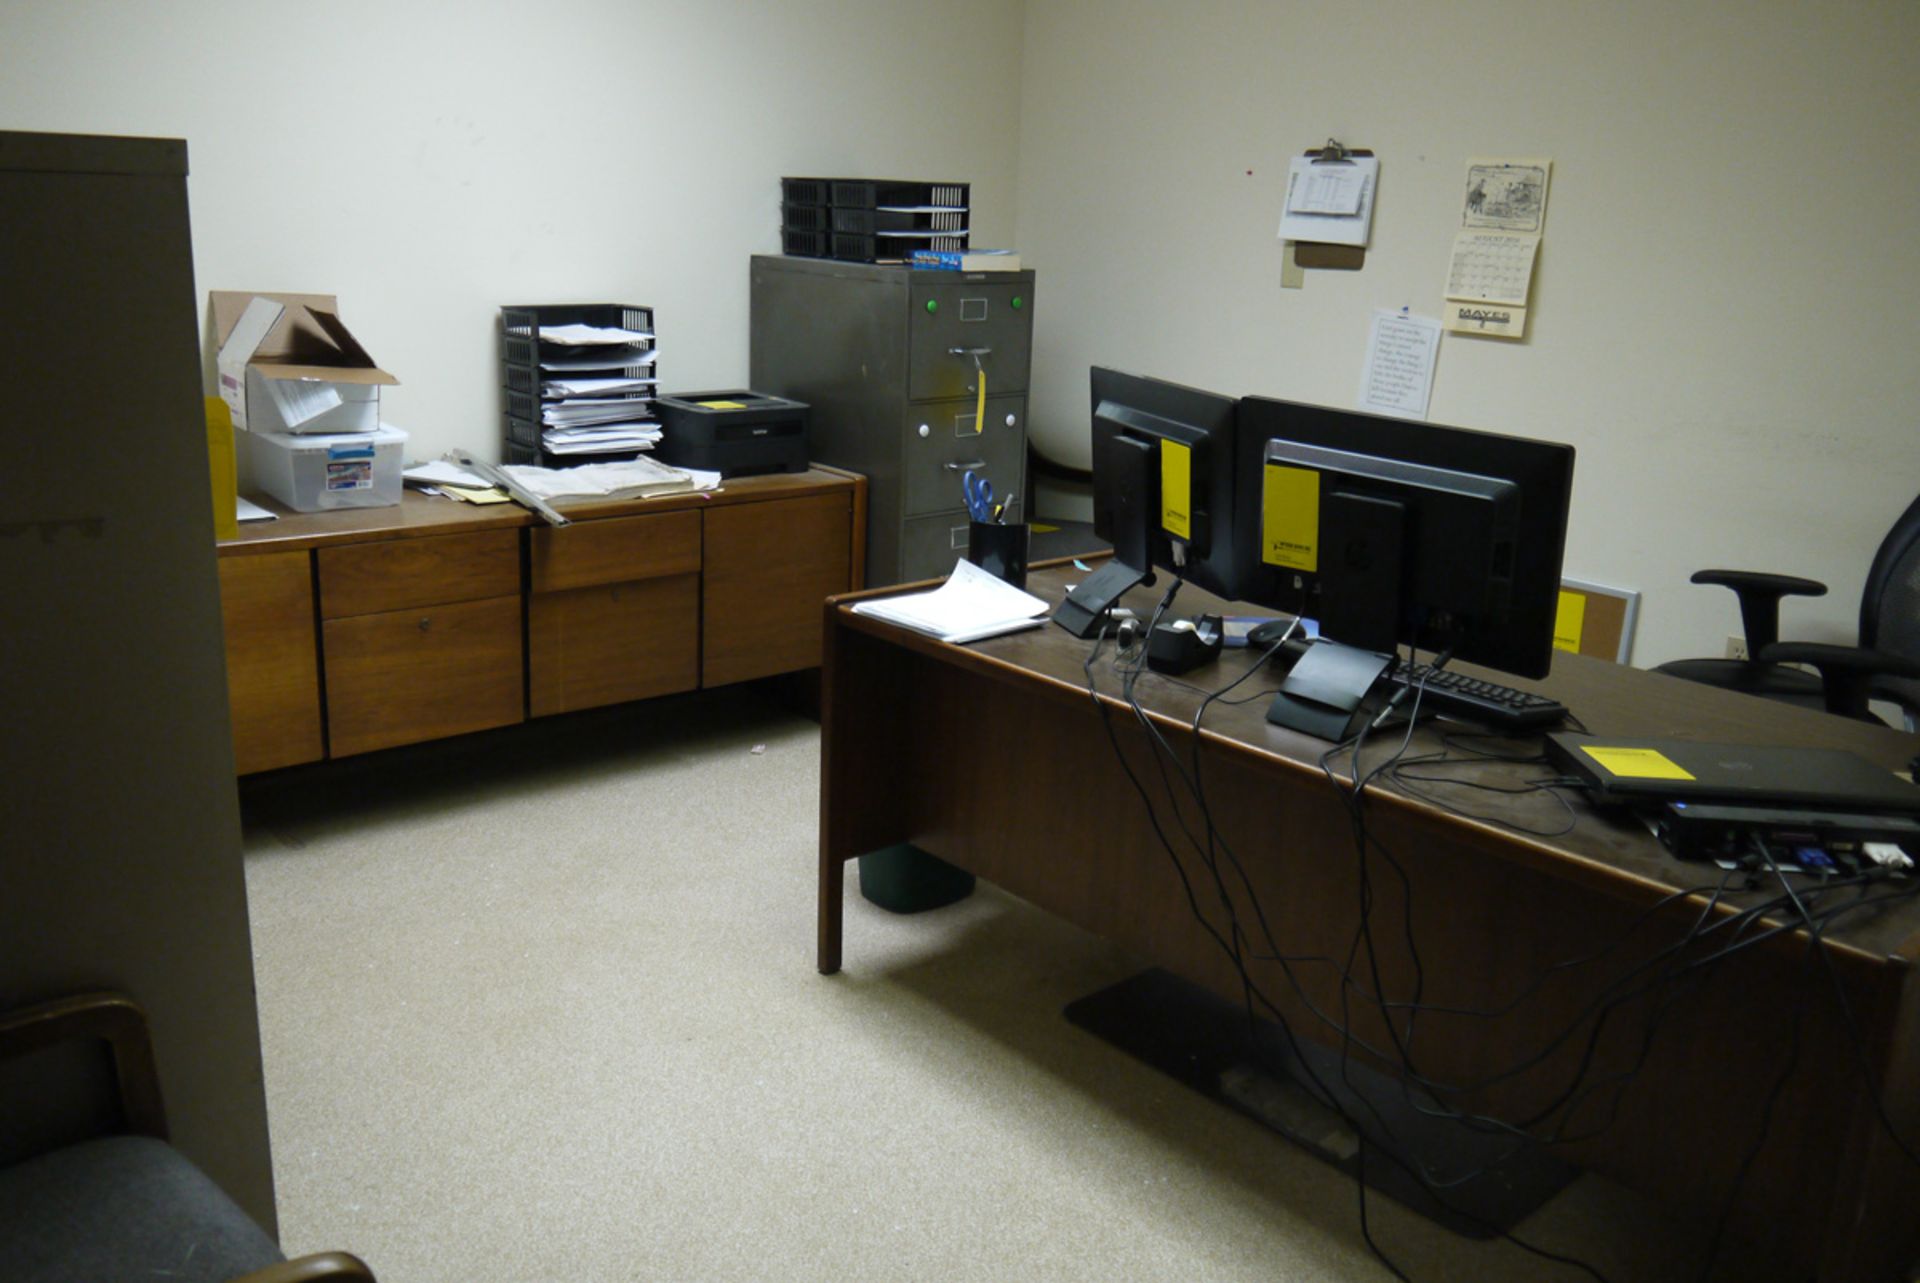 CONTENTS OF OFFICE, DESK, (3) CHAIRS, CONSOLE TABLE, FOLDING TABLE, AND (2) FILE CABINETS